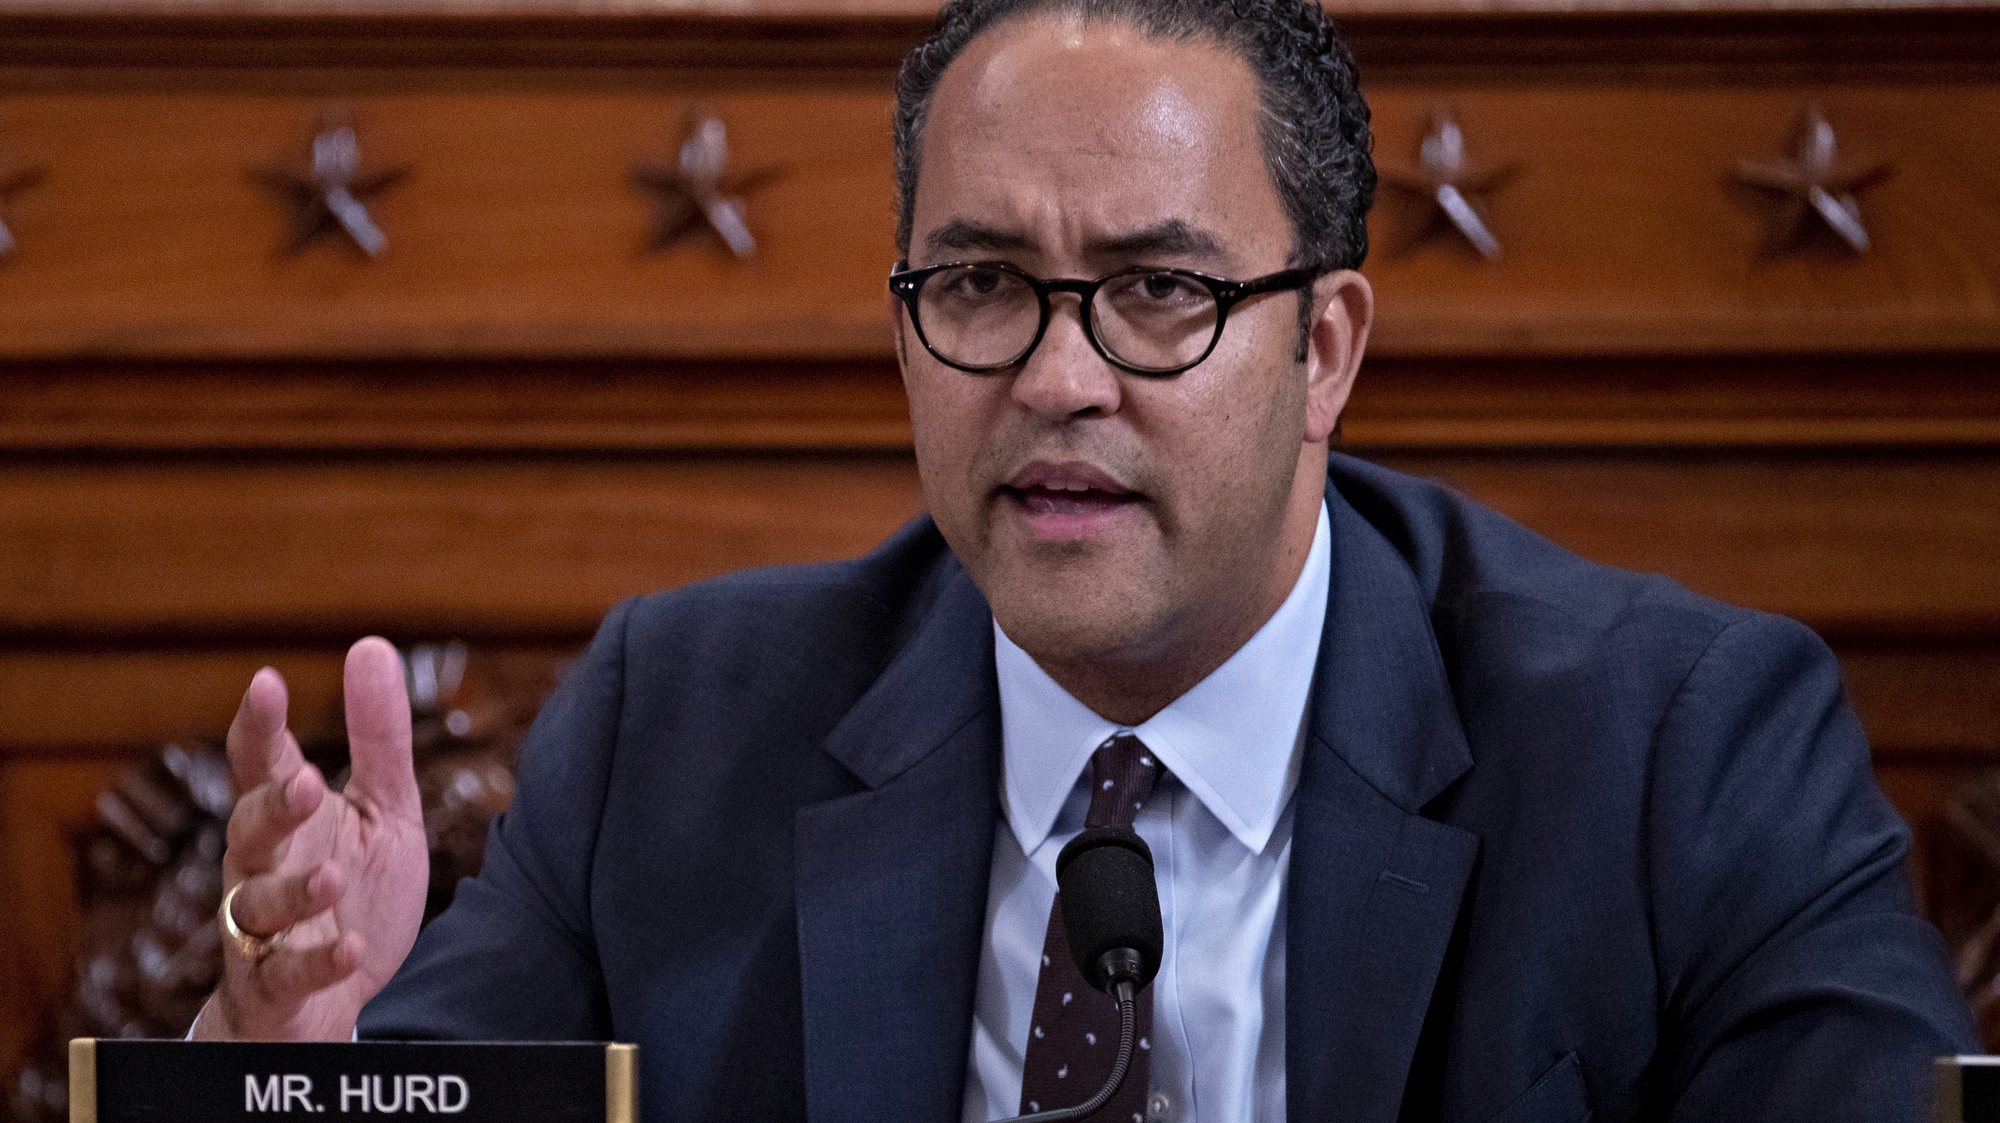 epa08015487 Representative Will Hurd, a Republican from Texas, questions witnesses during a House Intelligence Committee impeachment inquiry hearing in Washington, DC, USA, 21 November 2019. The impeachment inquiry is being led by three congressional committees and was launched following a whistleblower&#039;s complaint that alleges US President Donald J. Trump requested help from the President of Ukraine to investigate a political rival, Joe Biden and his son Hunter Biden.  EPA/ANDREW HARRER / POOL